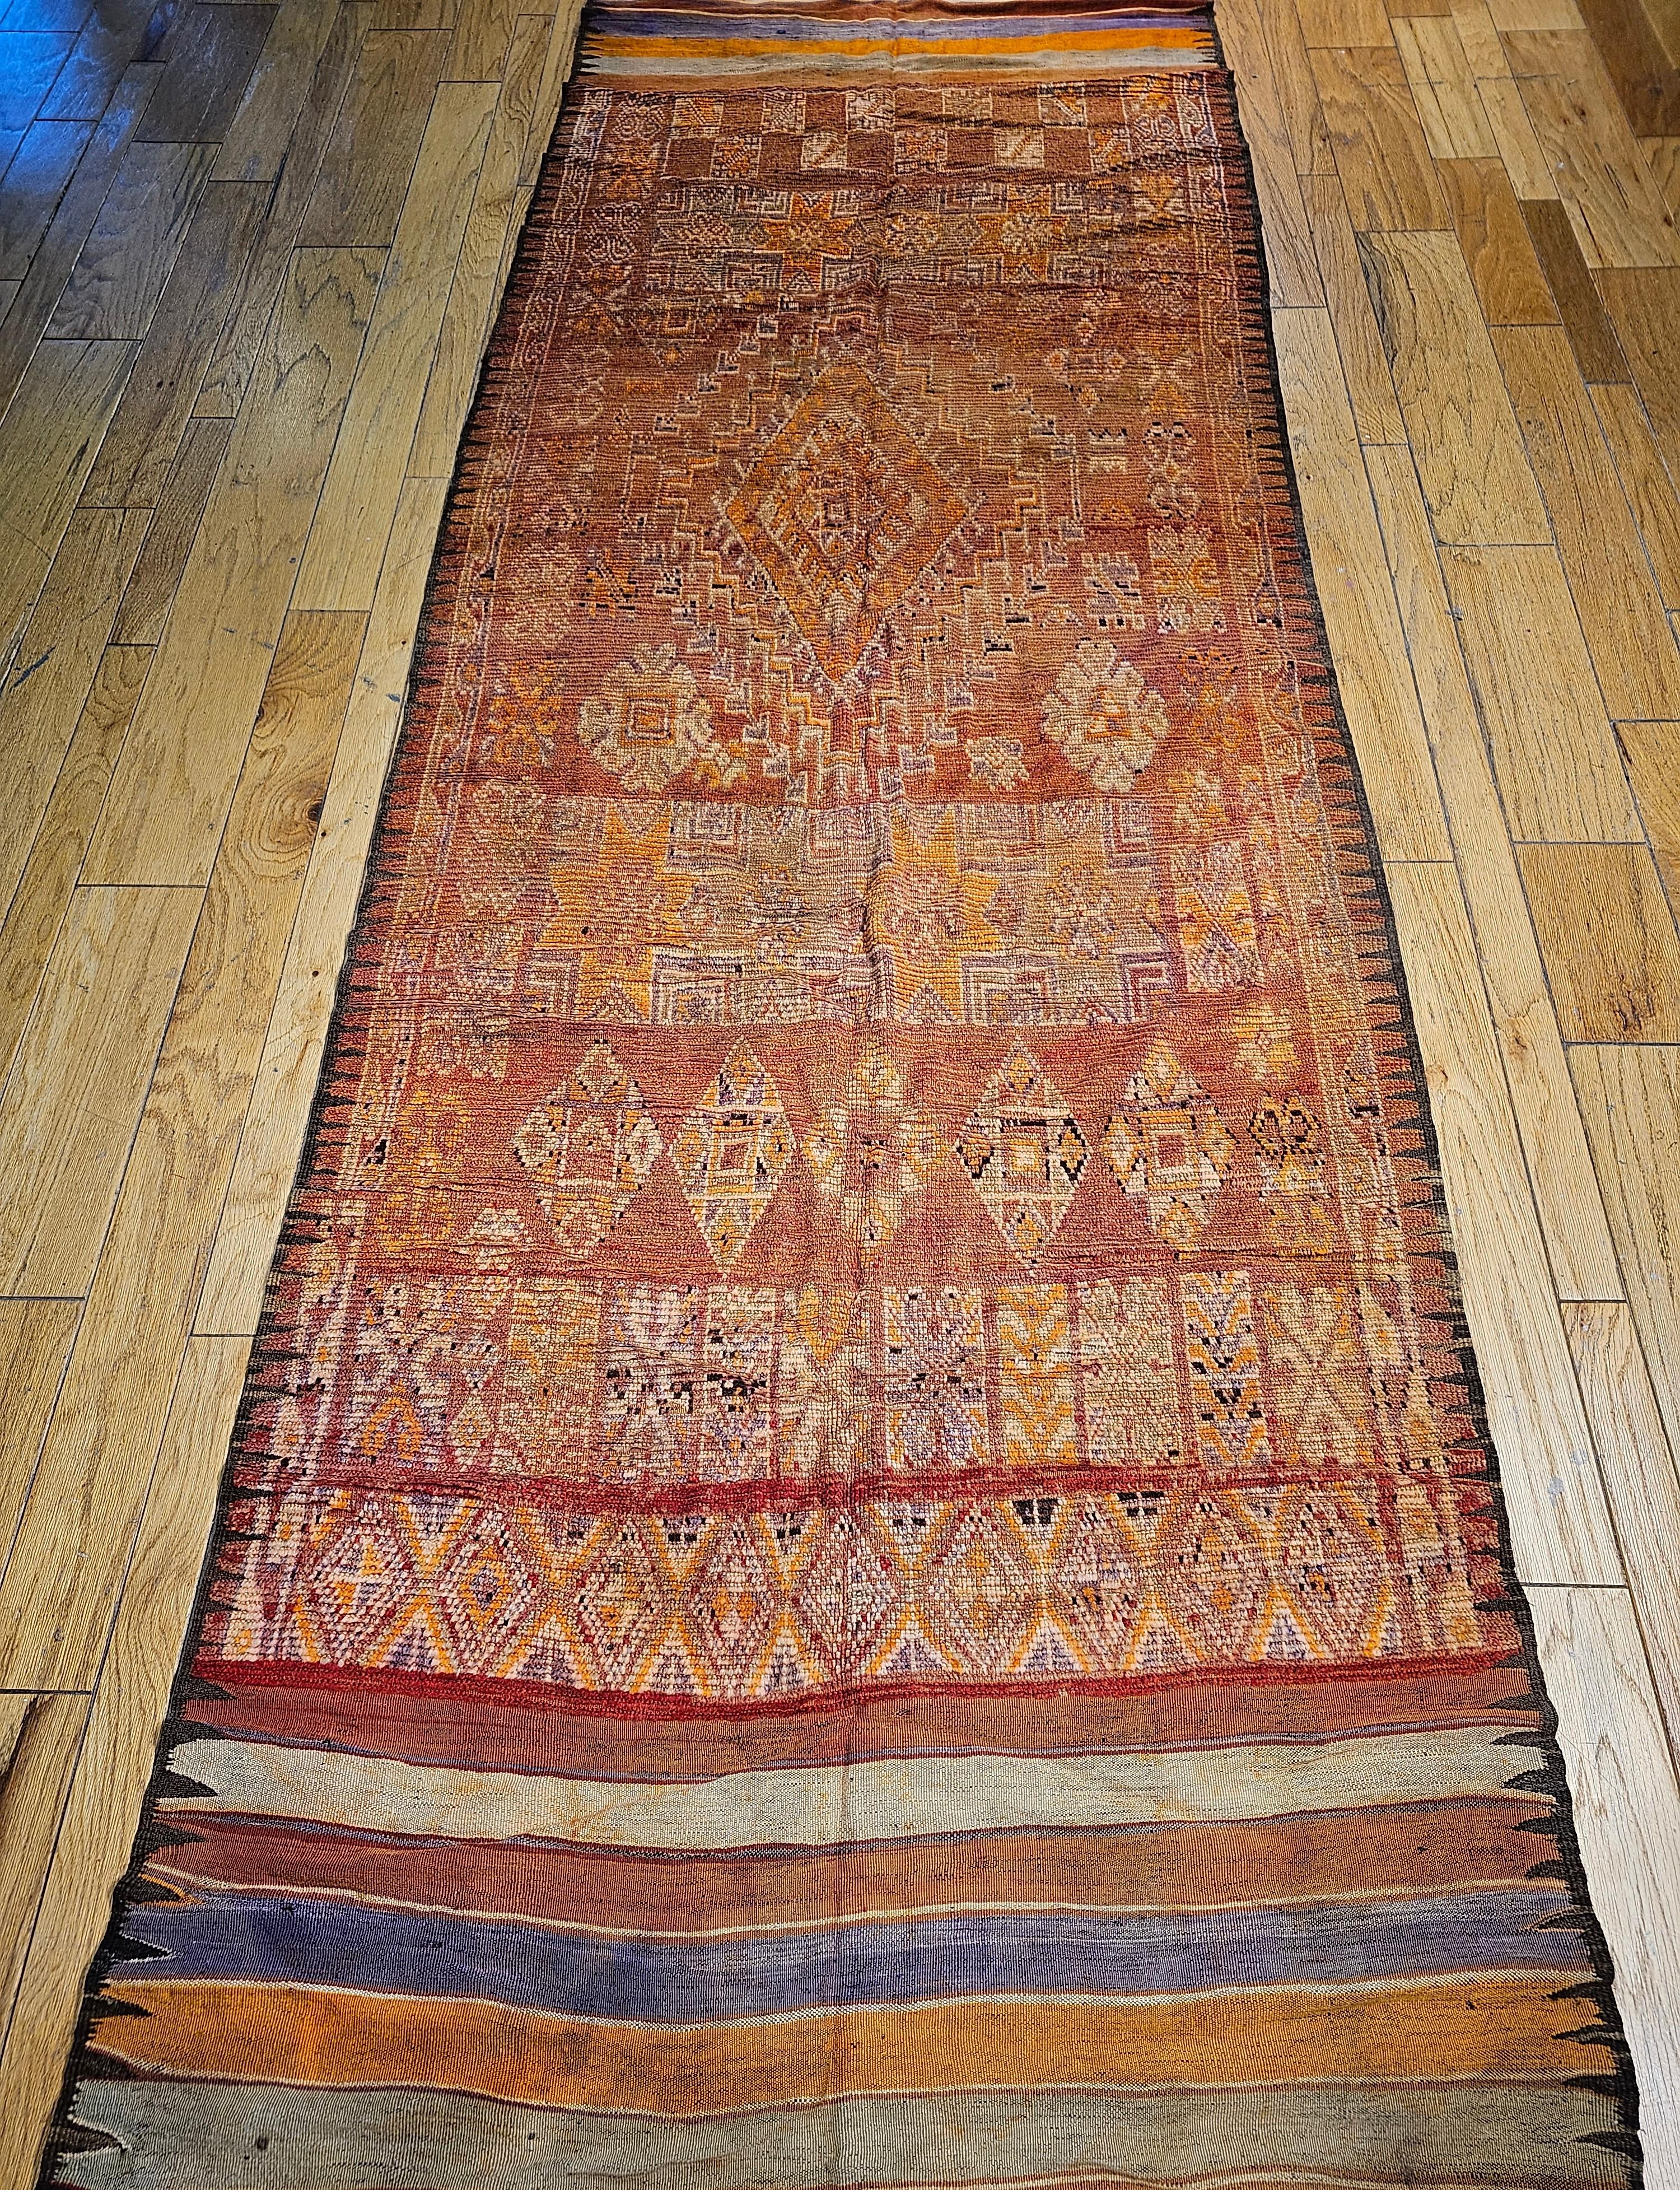 Vintage Moroccan Rabat gallery rug or a wide runner in a geometric pattern from the early 1900s.  Astonishing colors in the field and the border. A pale yellow provides the  background color for the geometric patterns in the field in shades of